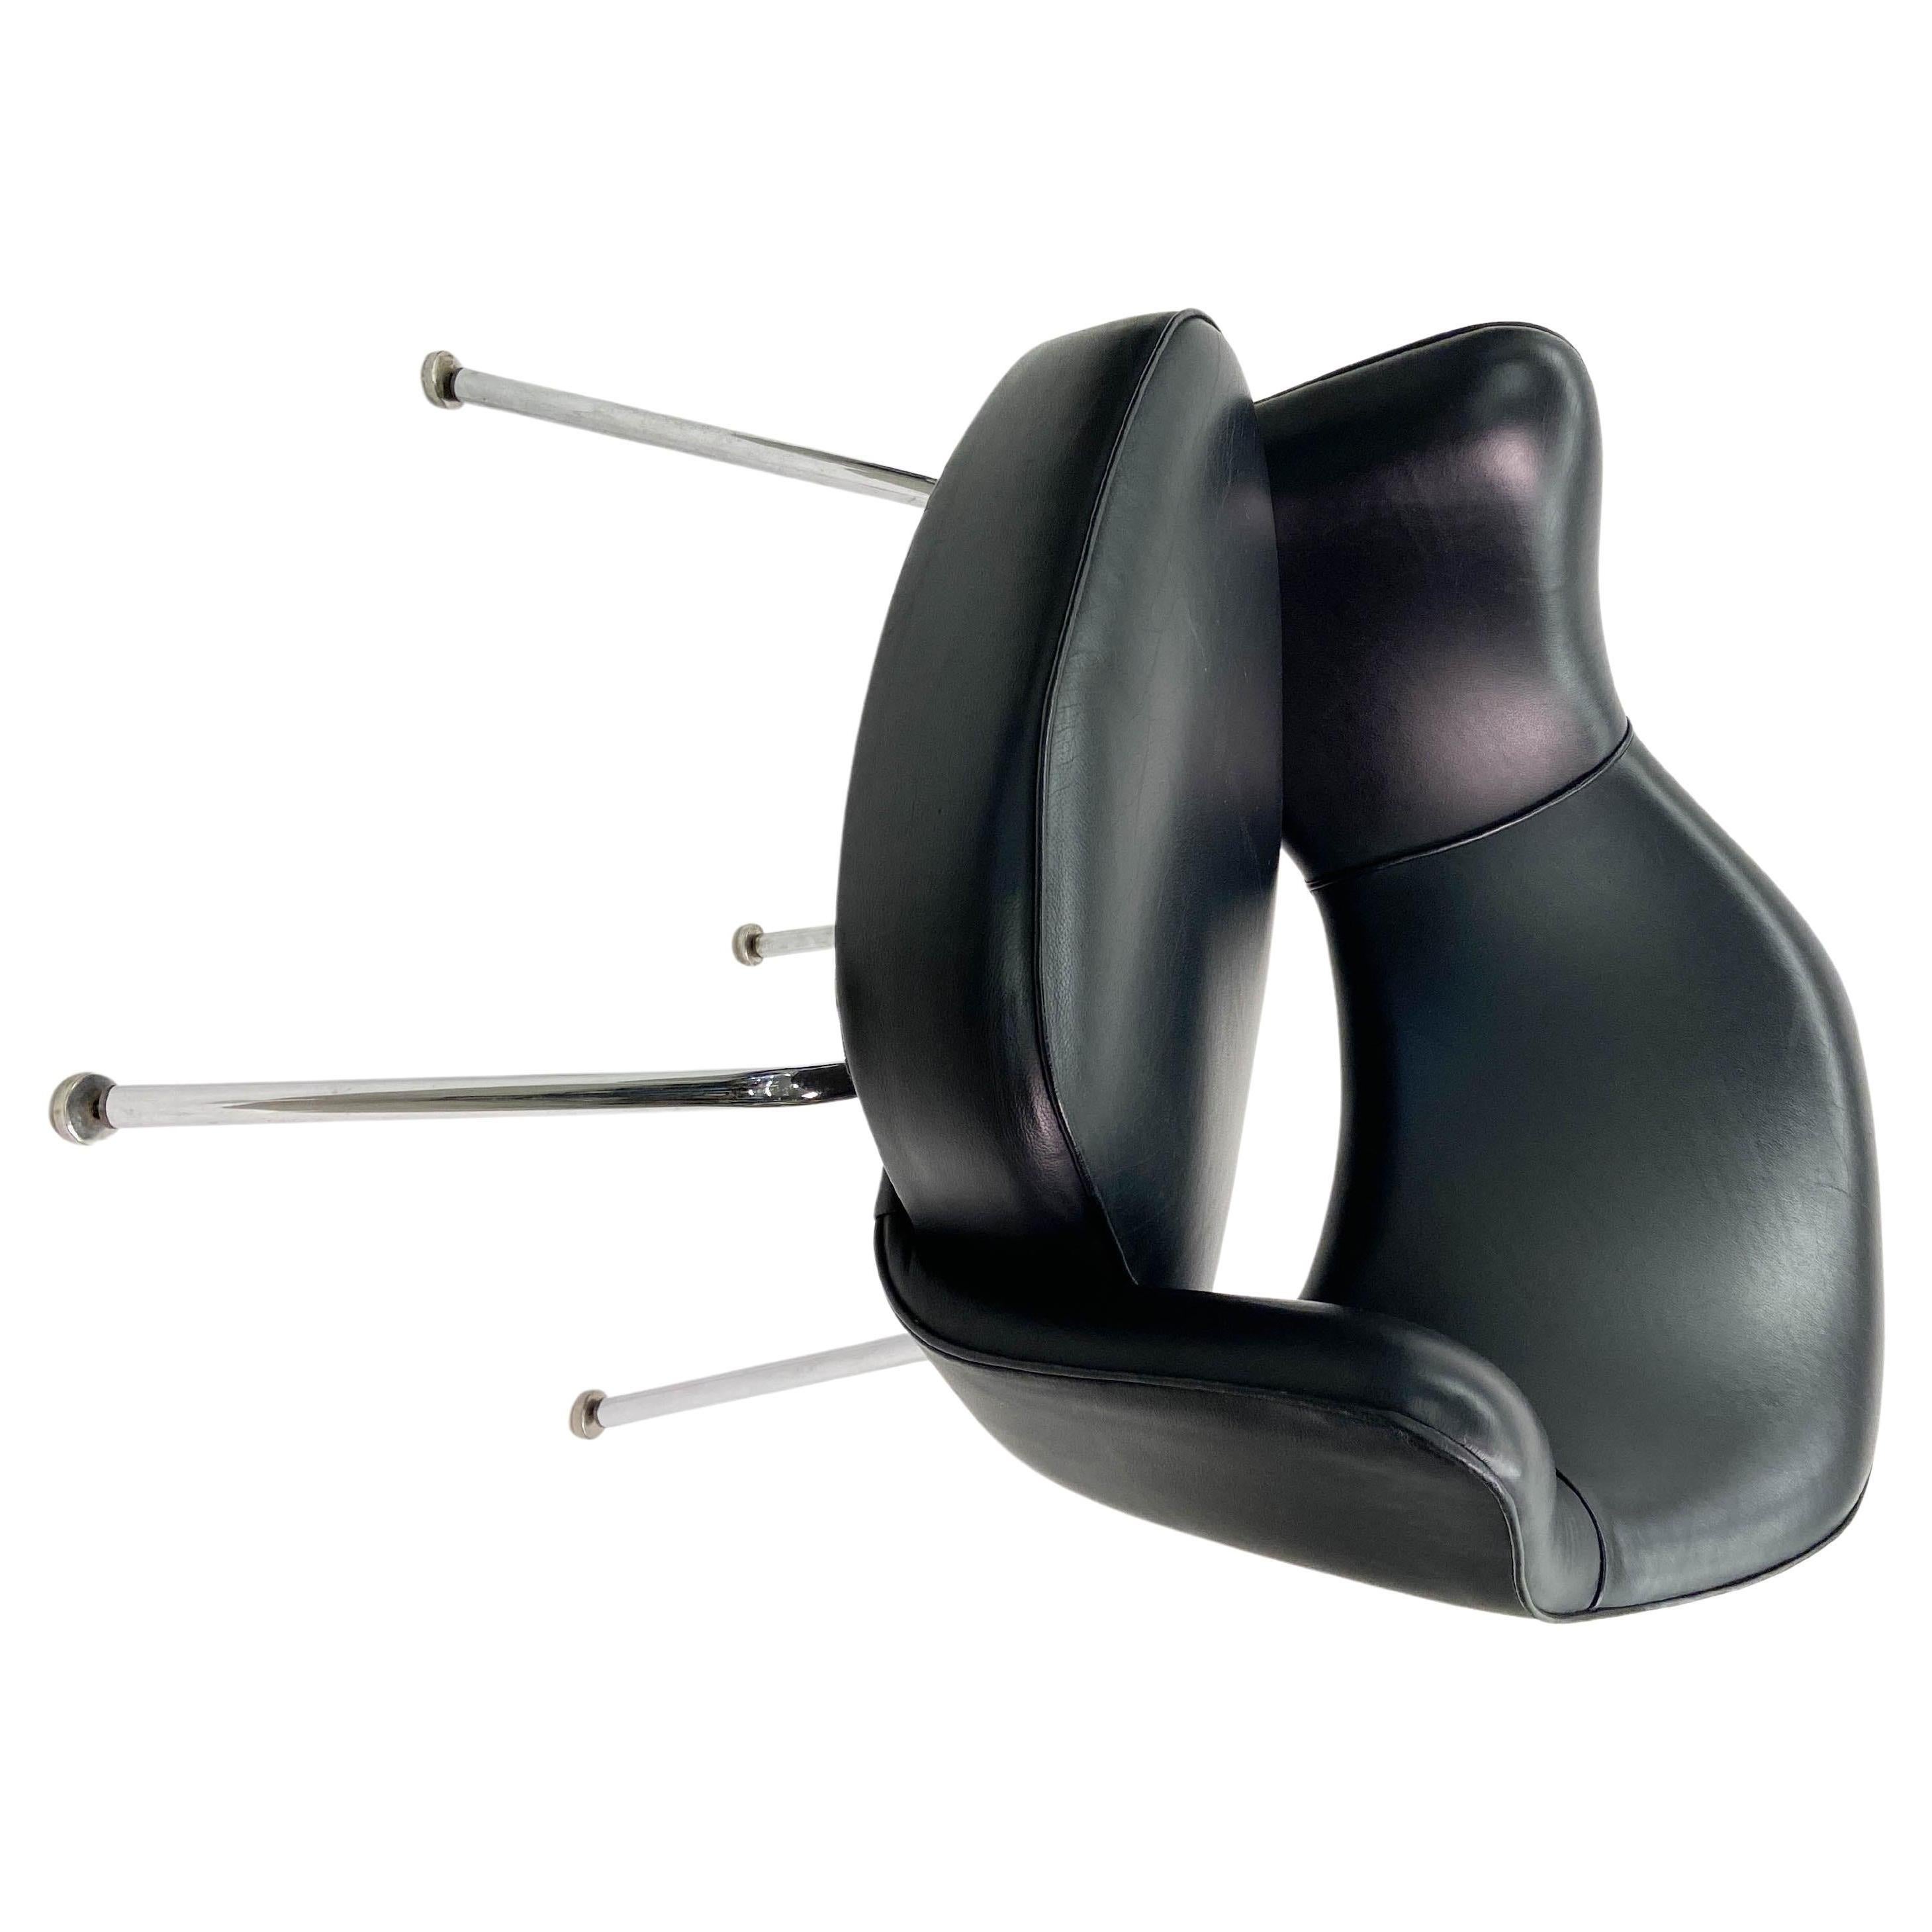 Manufactured by Knoll Furniture, the mid-century classic vintage Eero Saarinen Executive Armchair in its original black leather and chromed steel tubular legs. We have more chairs available and all are in very good condition.